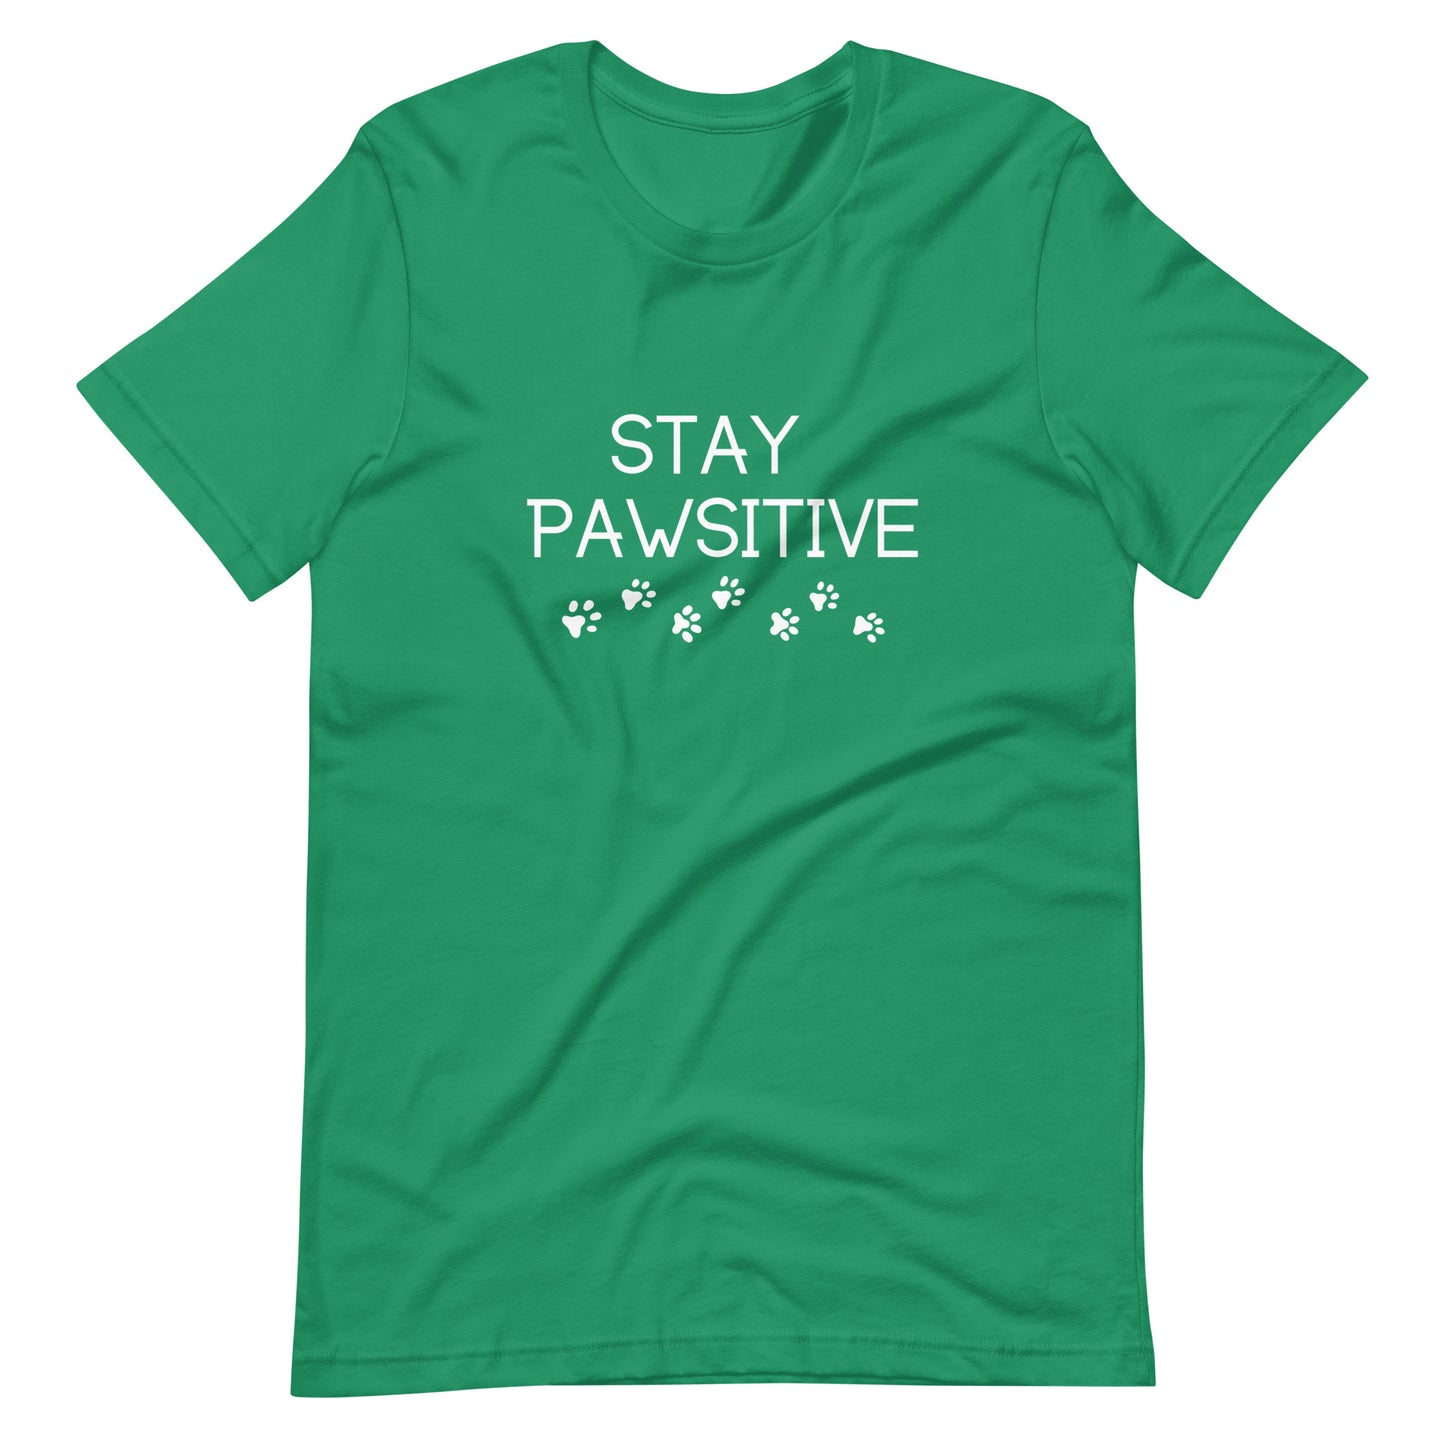 Stay Pawsitive Unisex T-Shirt